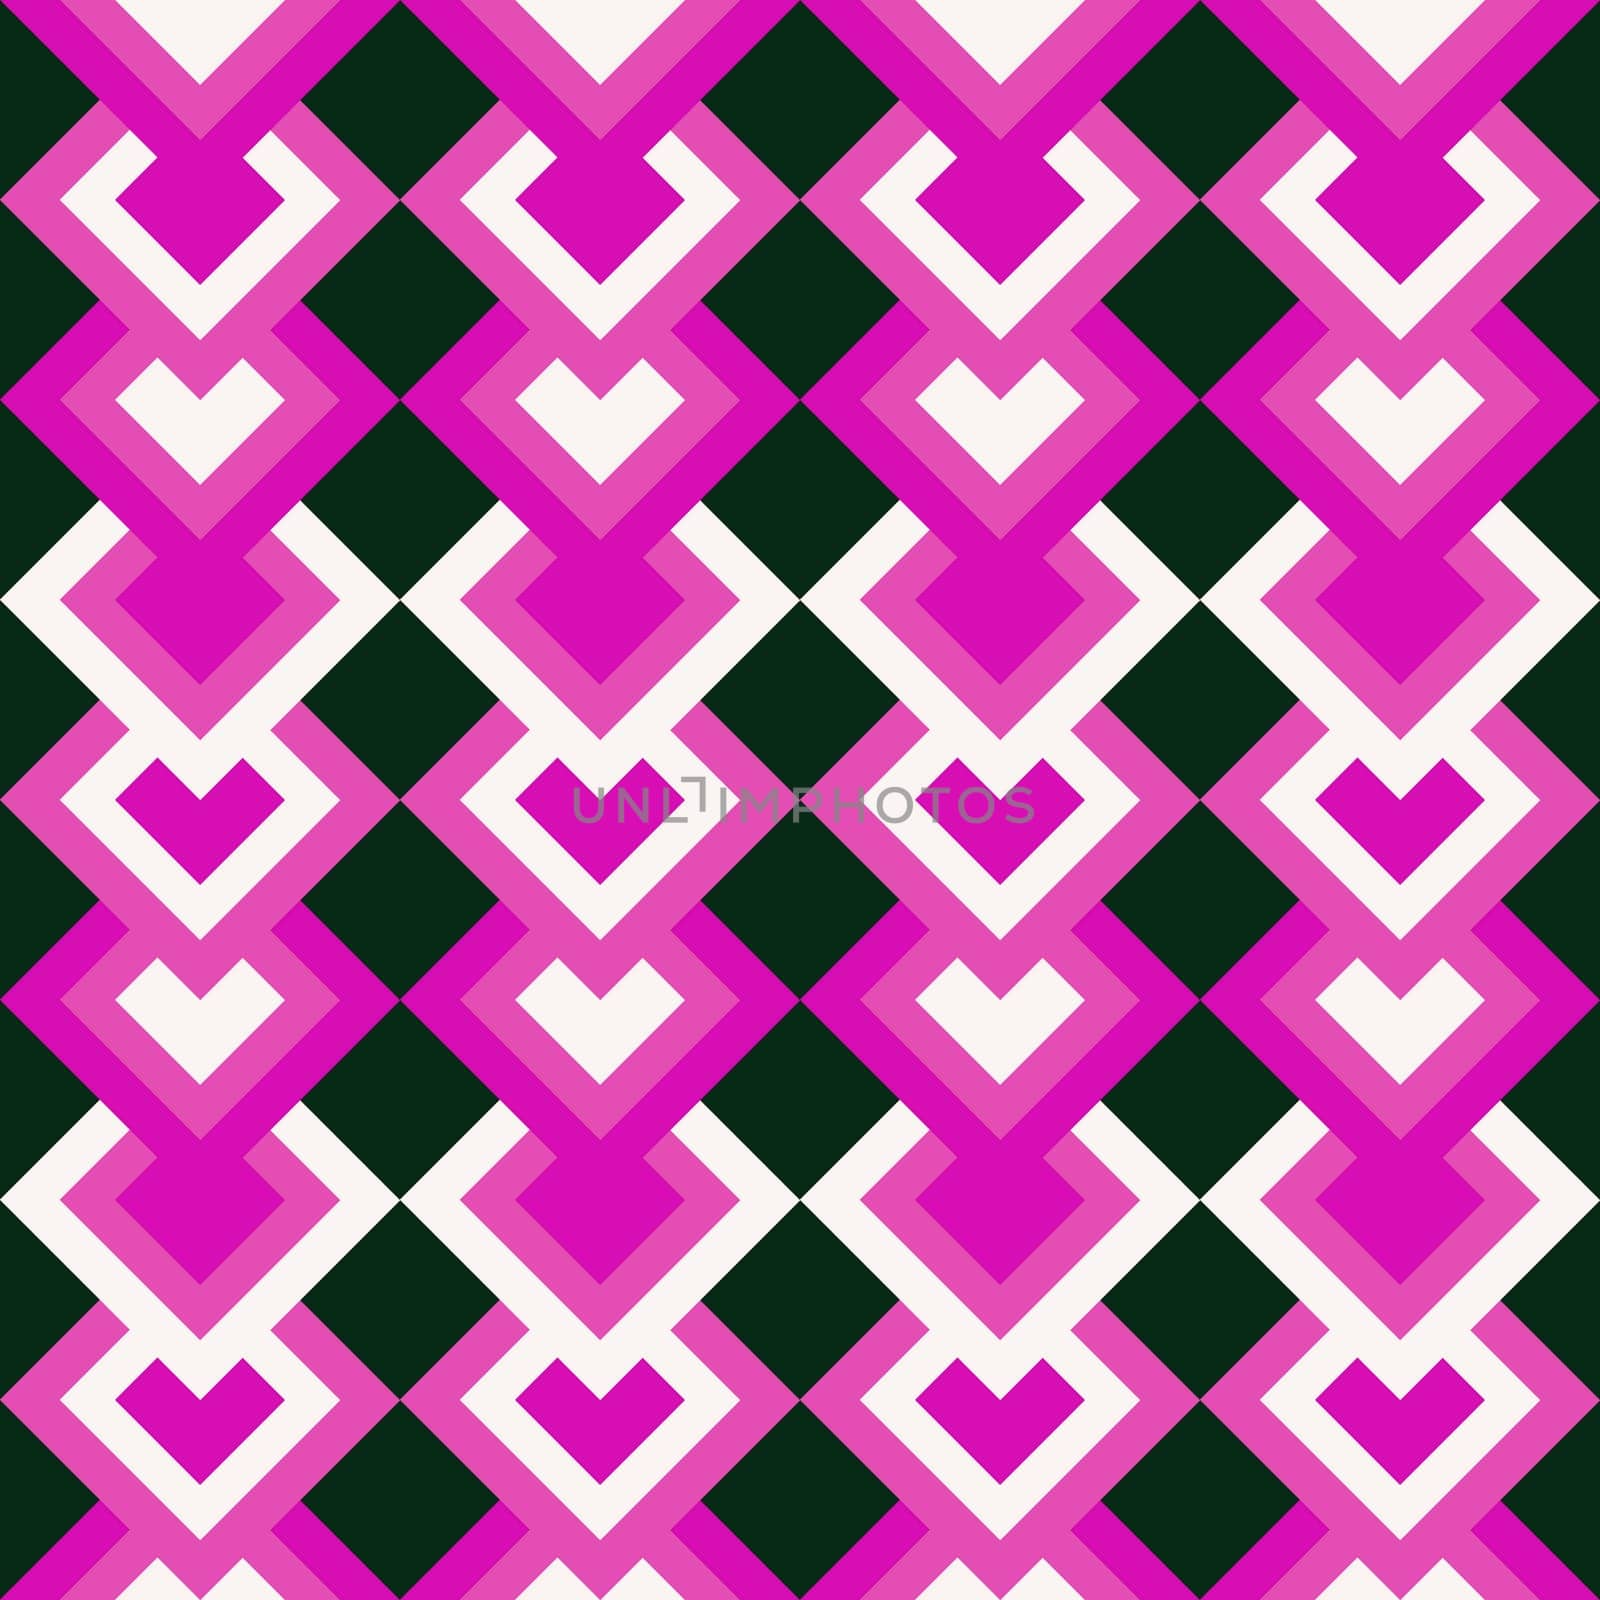 Seamless Groovy aesthetic pattern with triangles in the style of the 70s and 60s